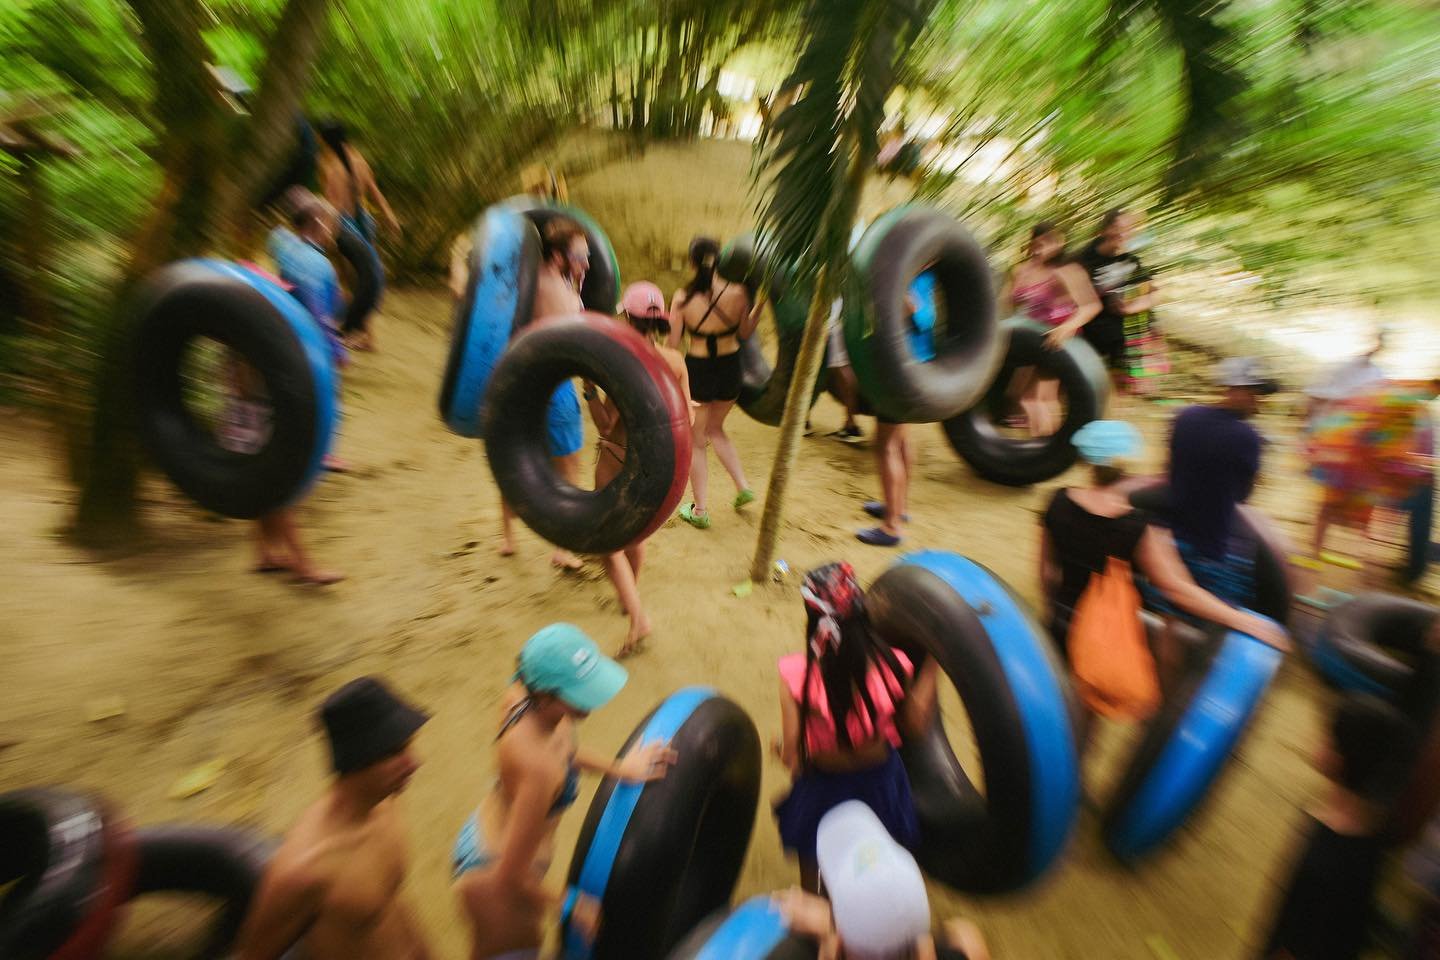 Tubing tubing let&rsquo;s go!

Ready to kick back and enjoy some river vibes? Join us for a laid-back tubing trip down the Buritaca River to the hostel beach. It&rsquo;s all about chilling out, soaking up nature, and having a good time with your mate